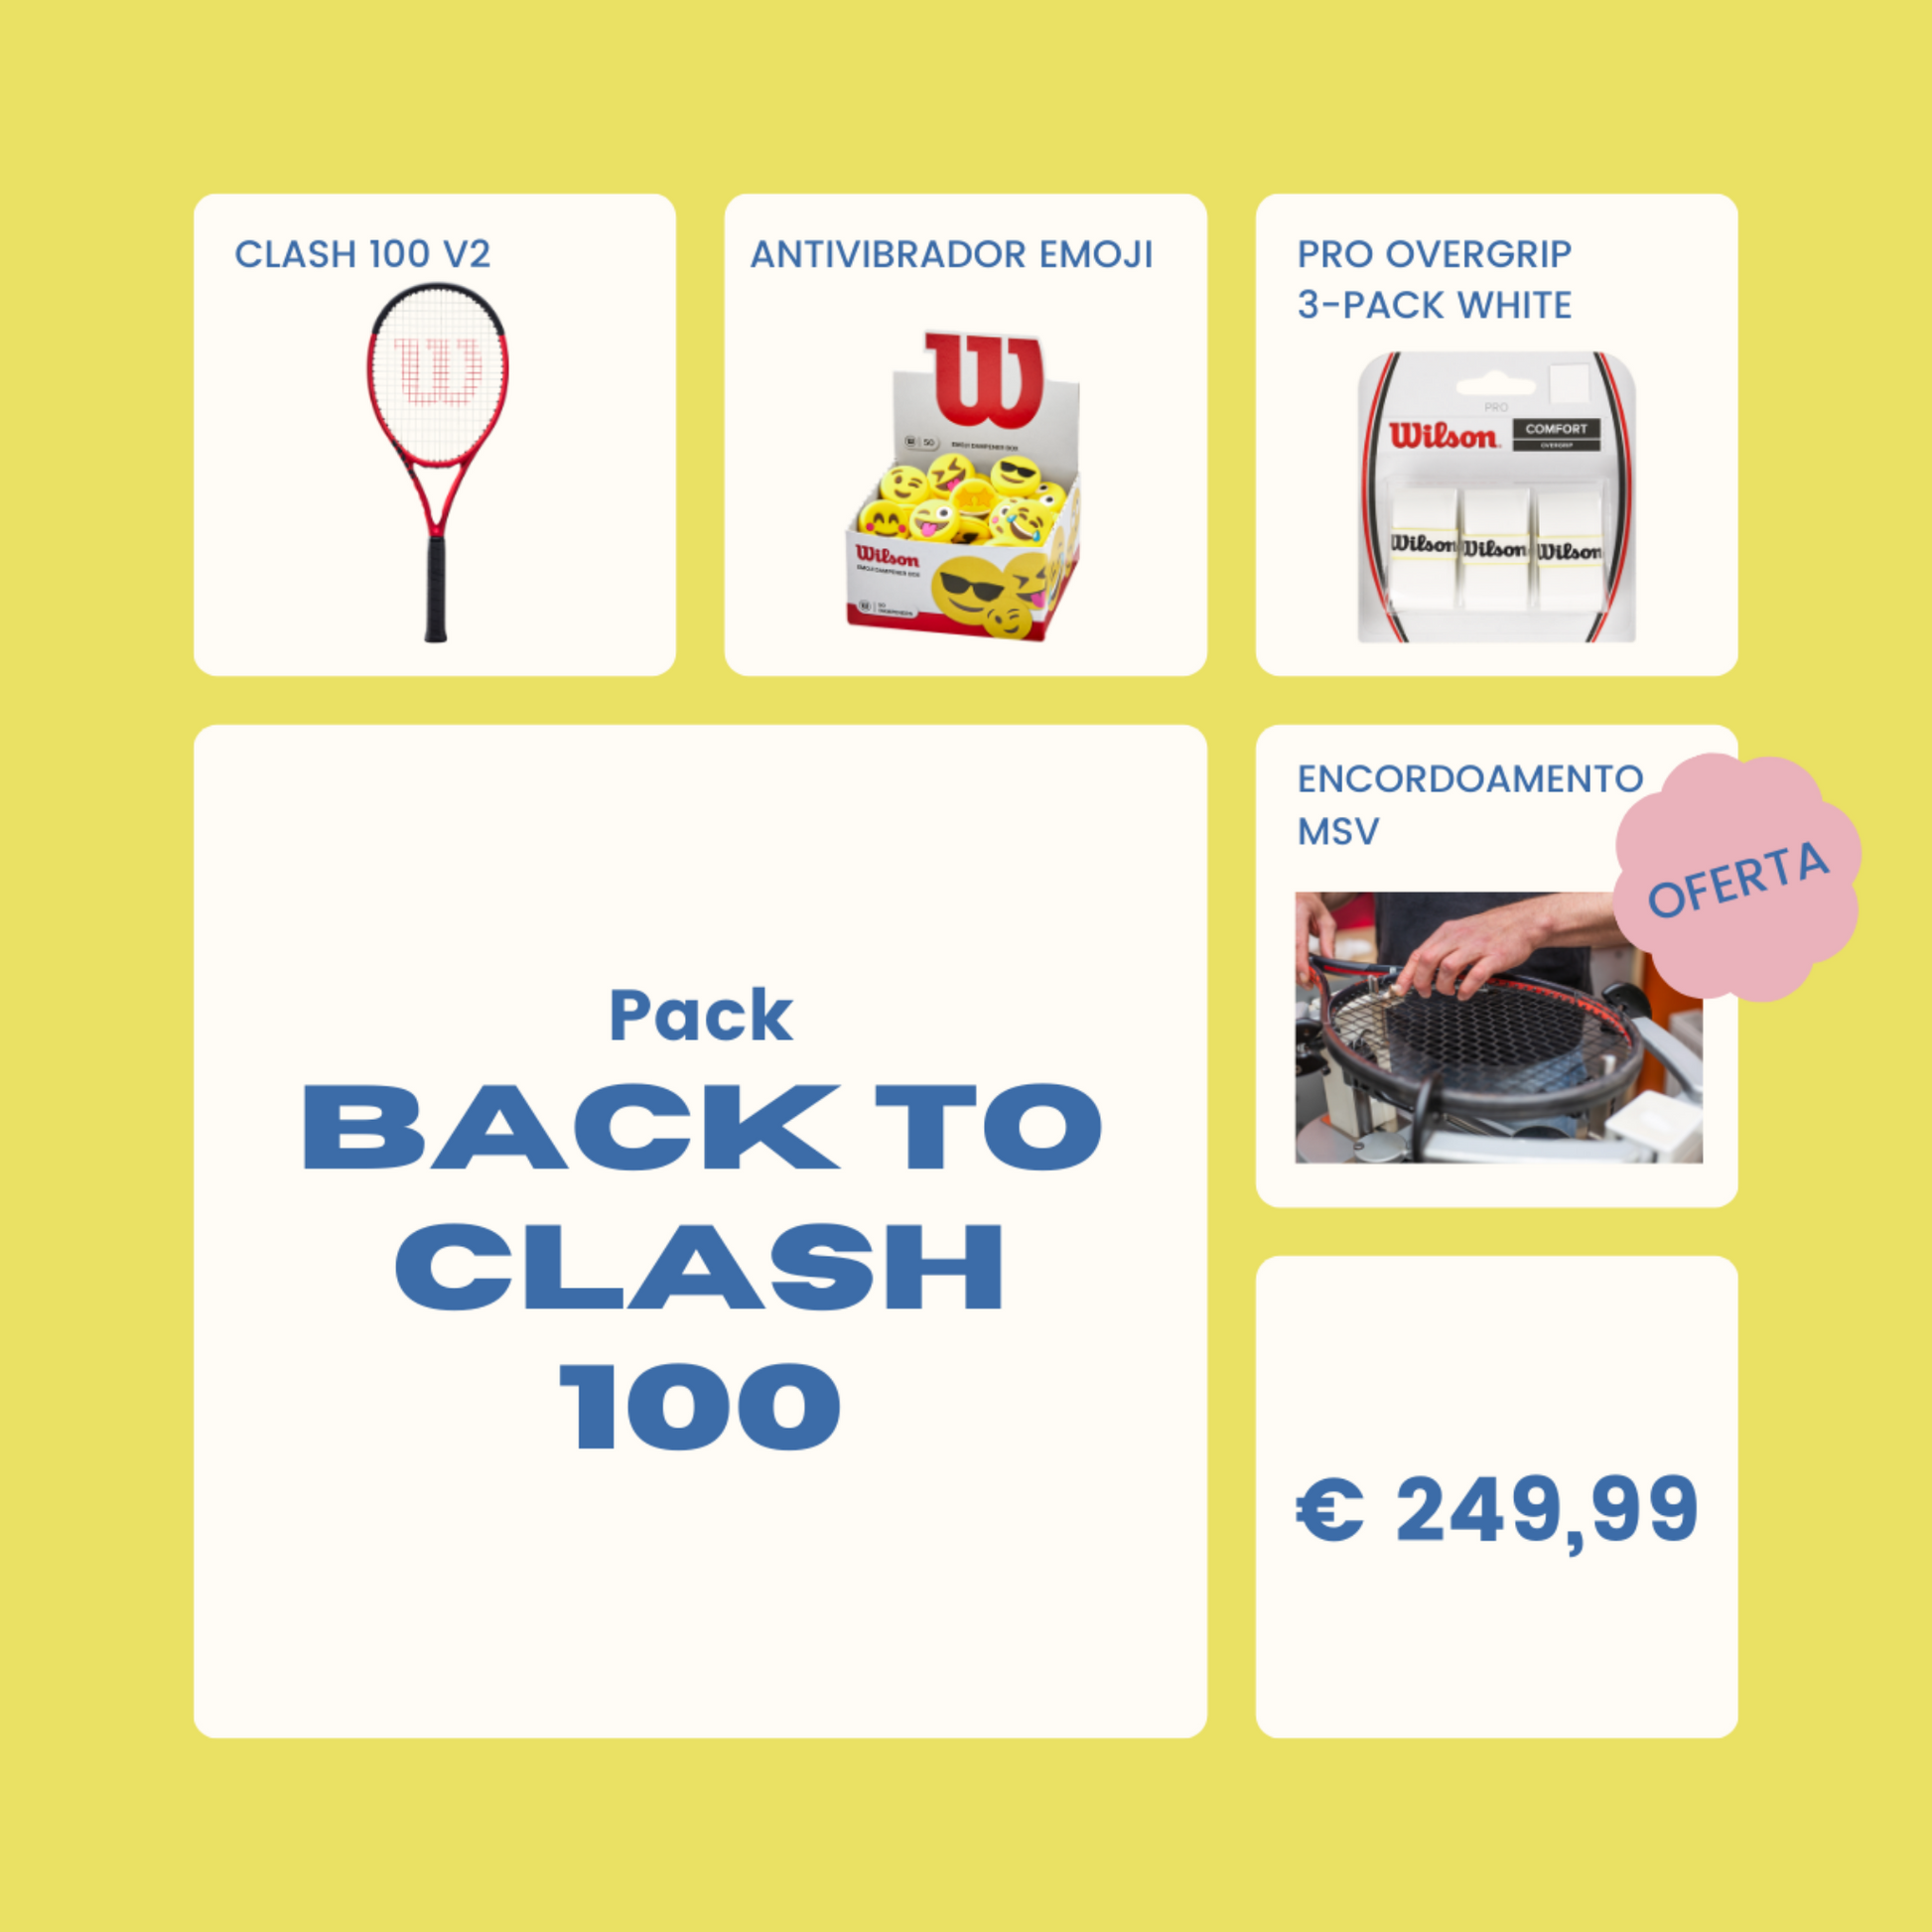 pack-back-to-clash-100-wilson-msv